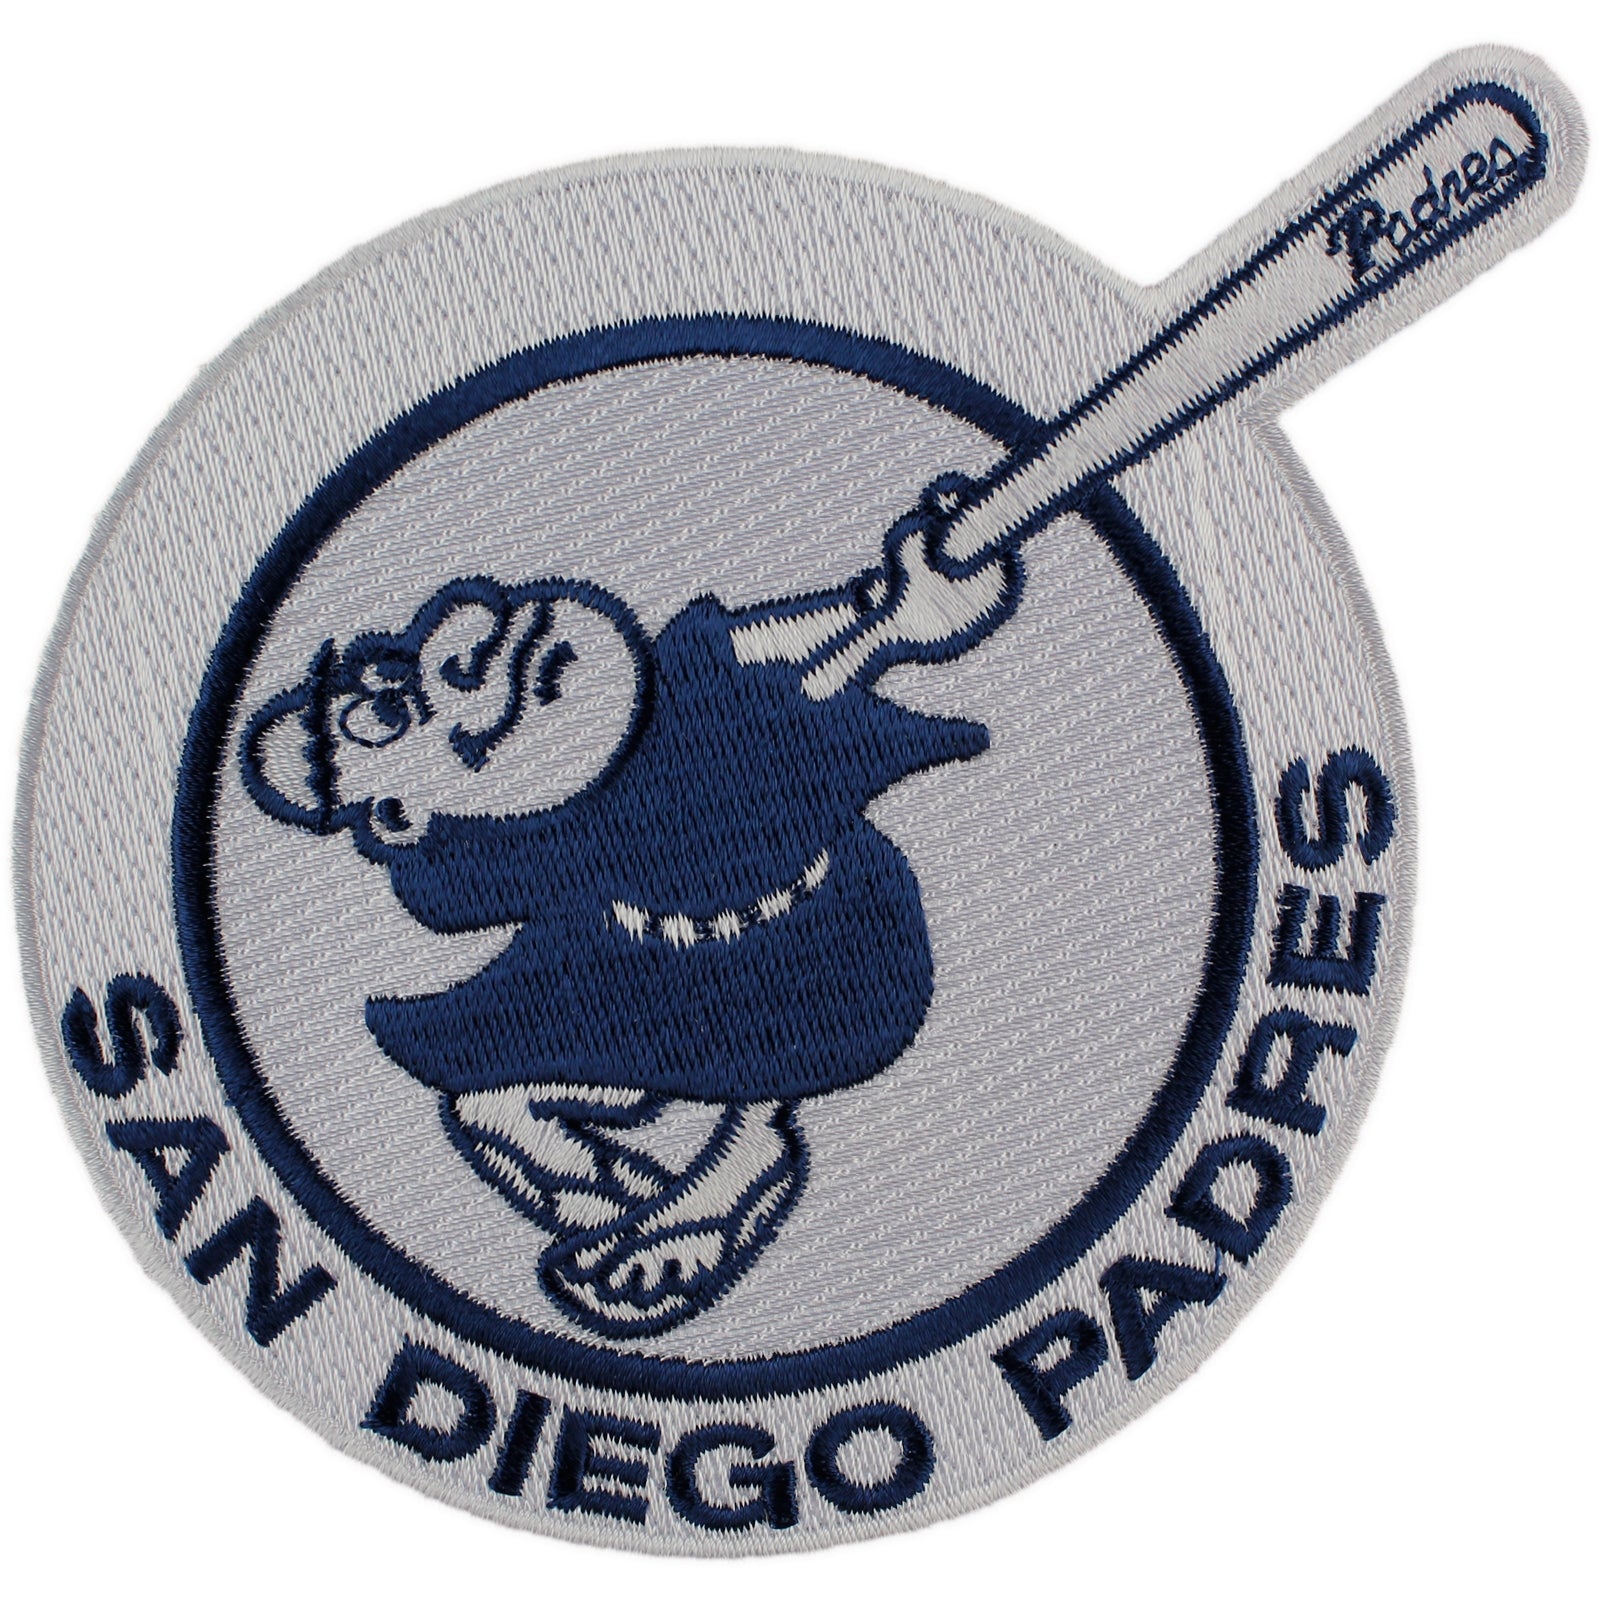 San Diego Padres Home Jersey Collectible Patch